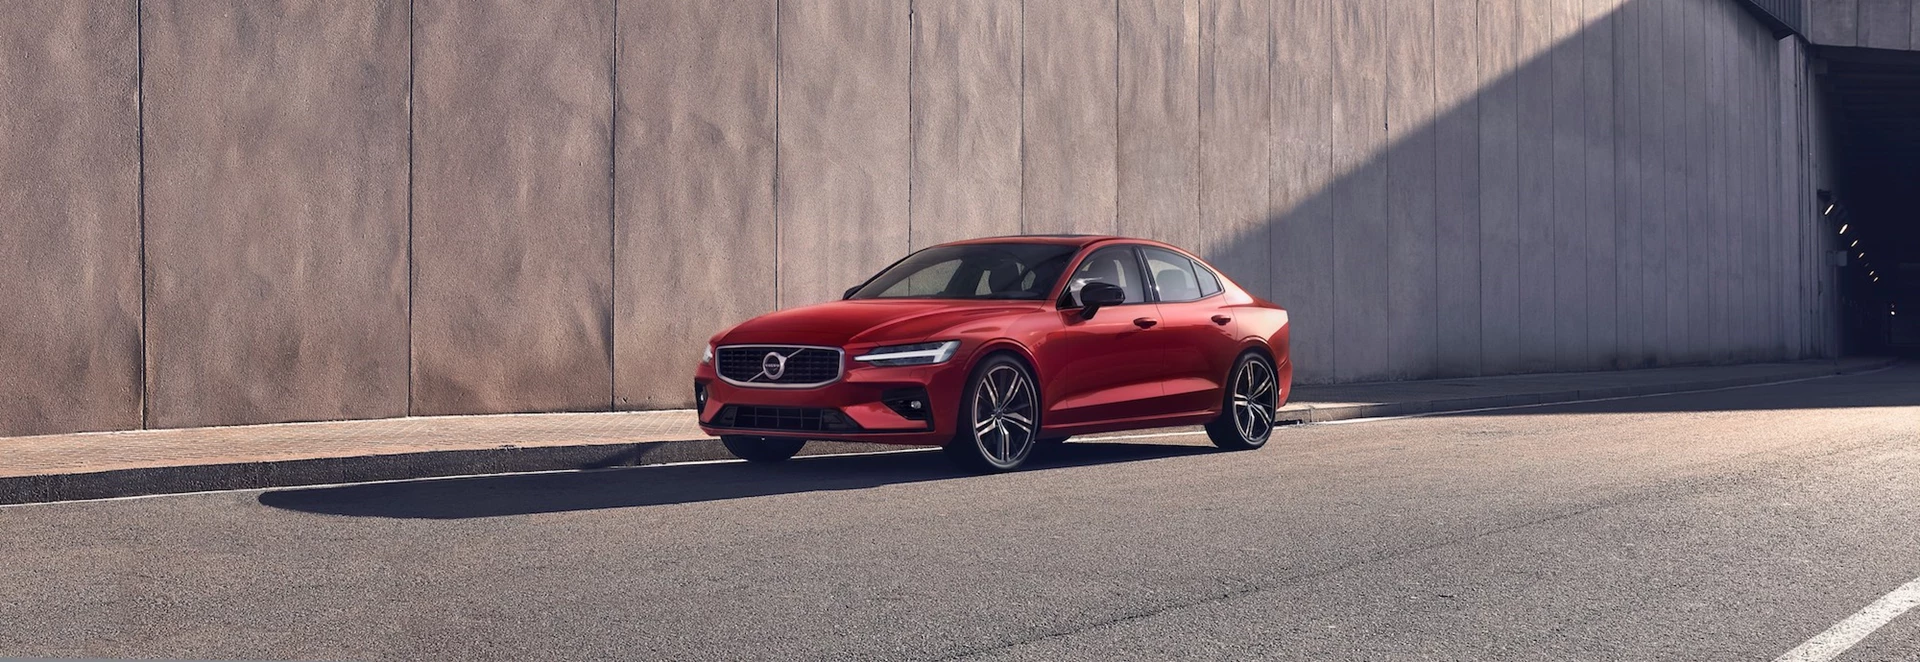 New 2018 Volvo S60 officially revealed